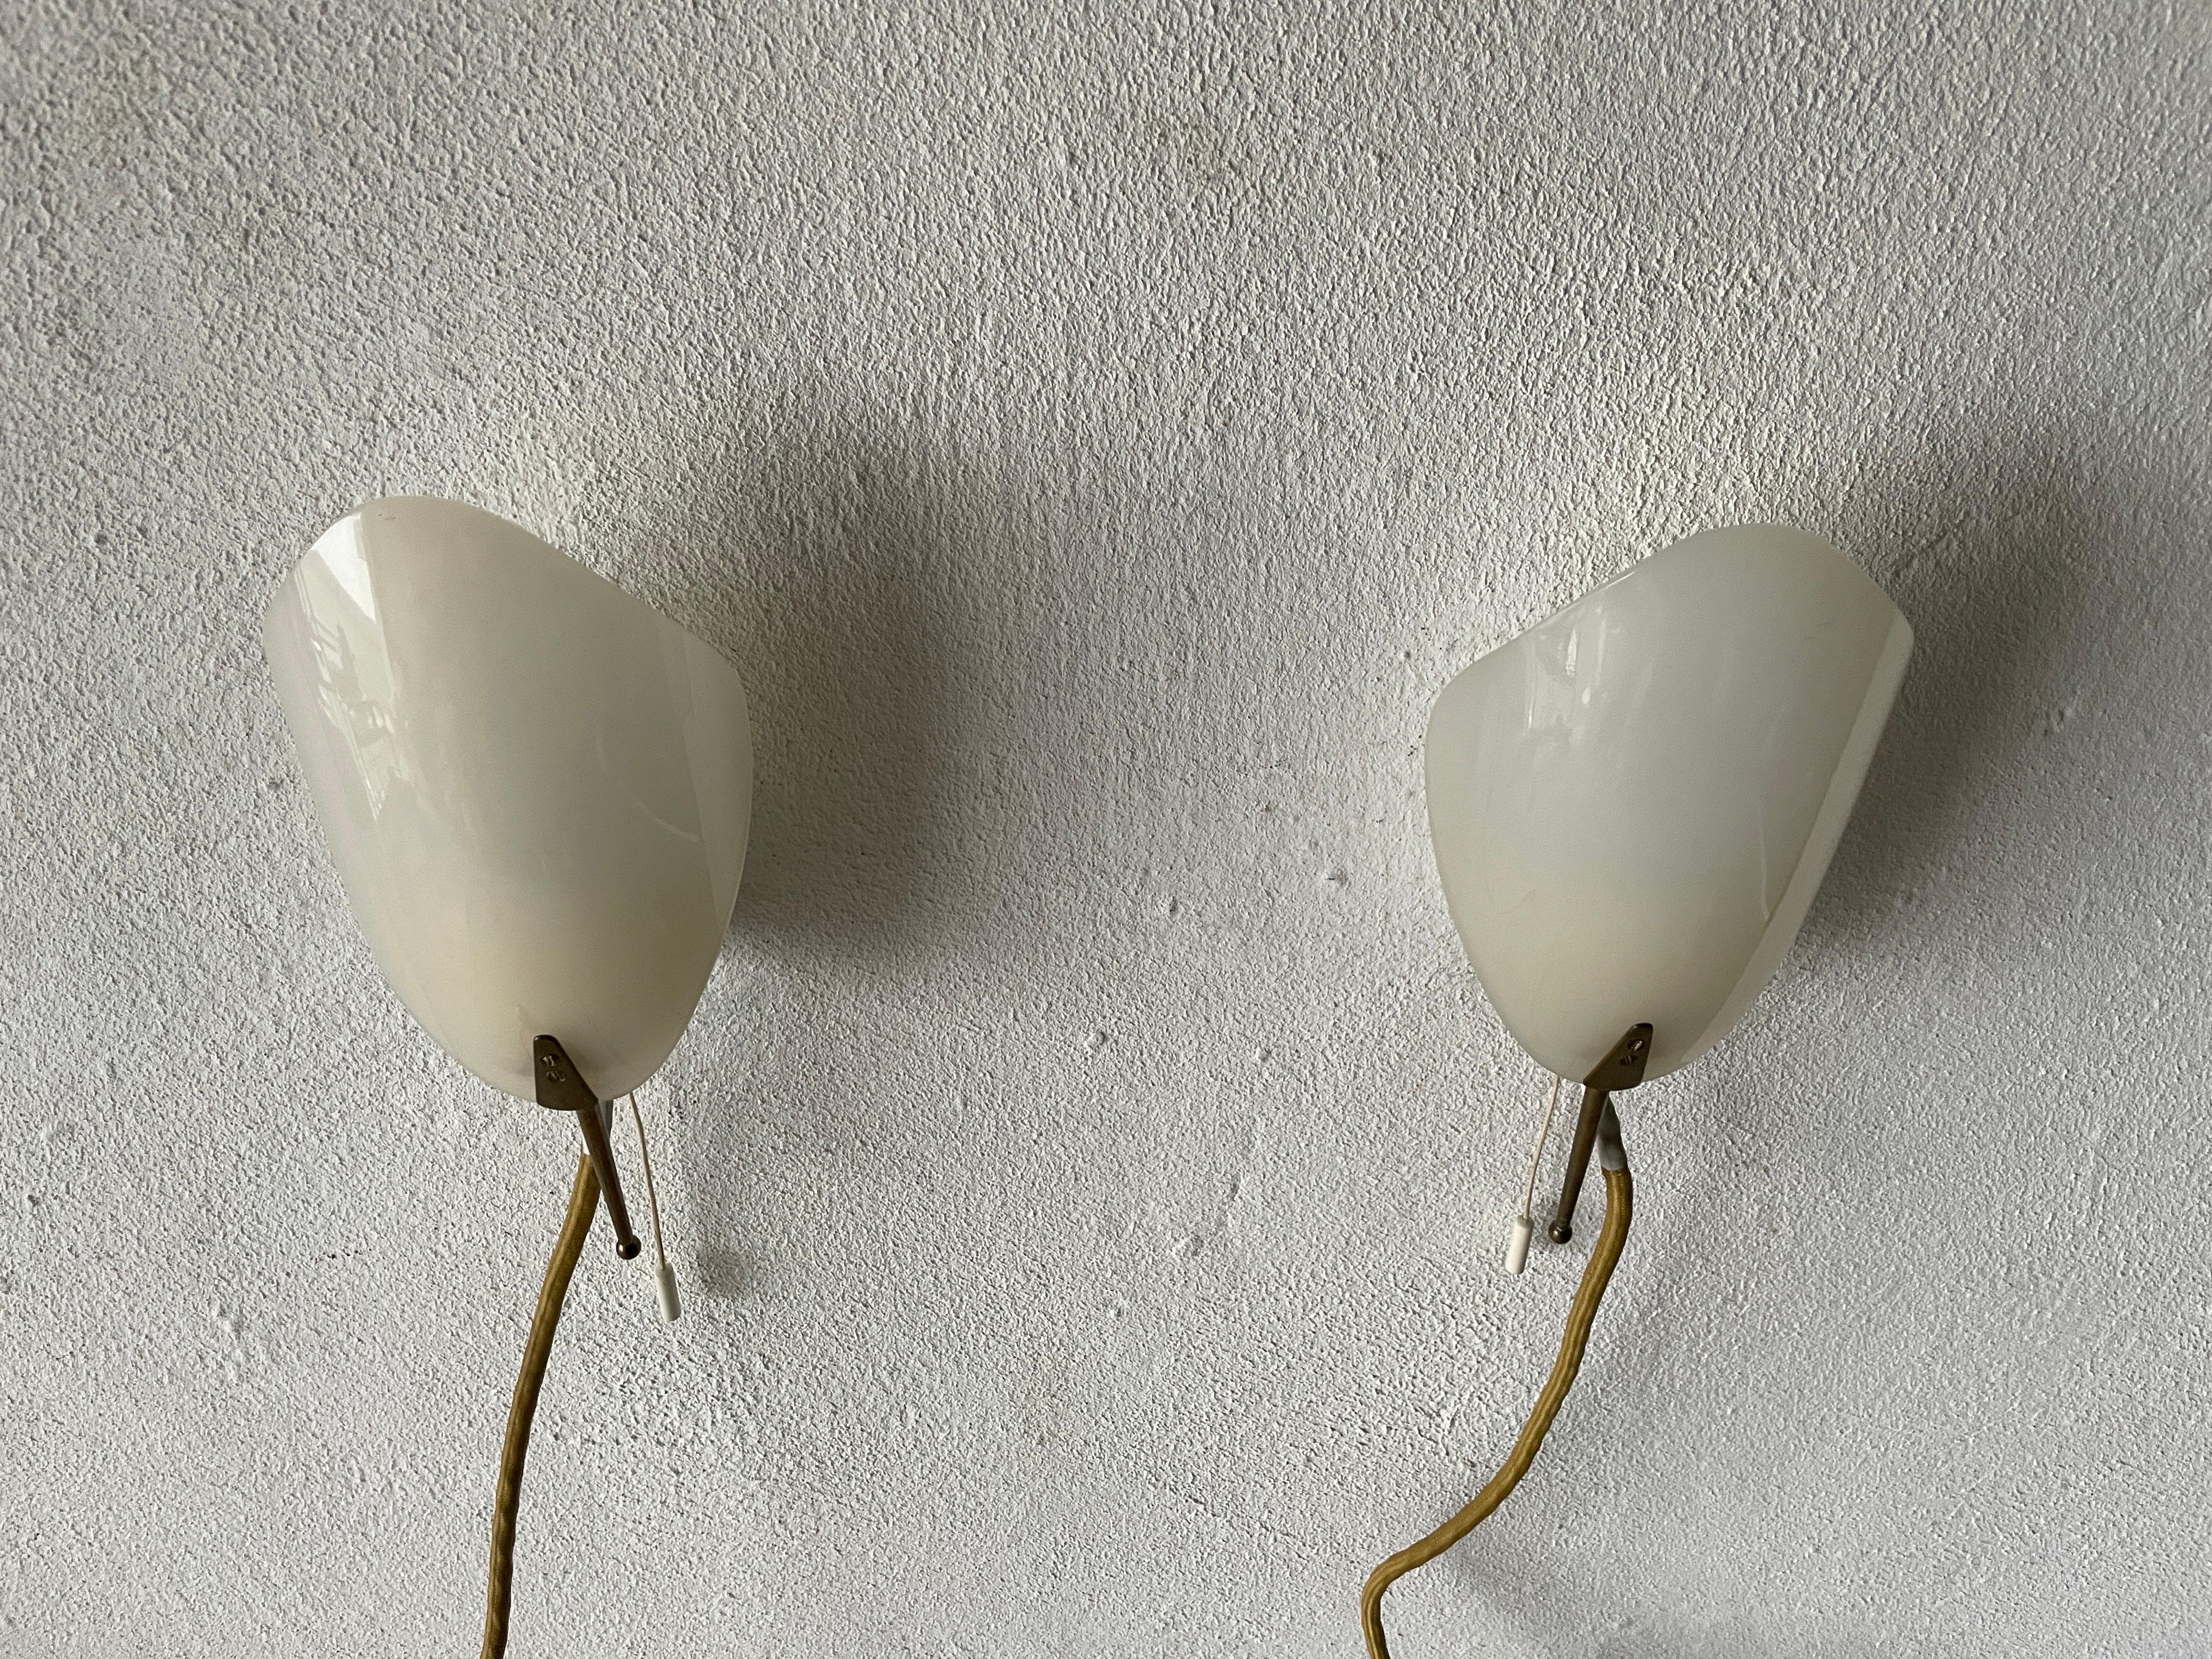 Mid Centursy Modern Plexiglass and Brass Leaf shaped Pair of Sconces, 1950s, Germany

Very elegant and Minimalist wall lamps
Lamp is in very good condition.

These lamps works with E14 standard light bulbs. 
Wired and suitable to use in all